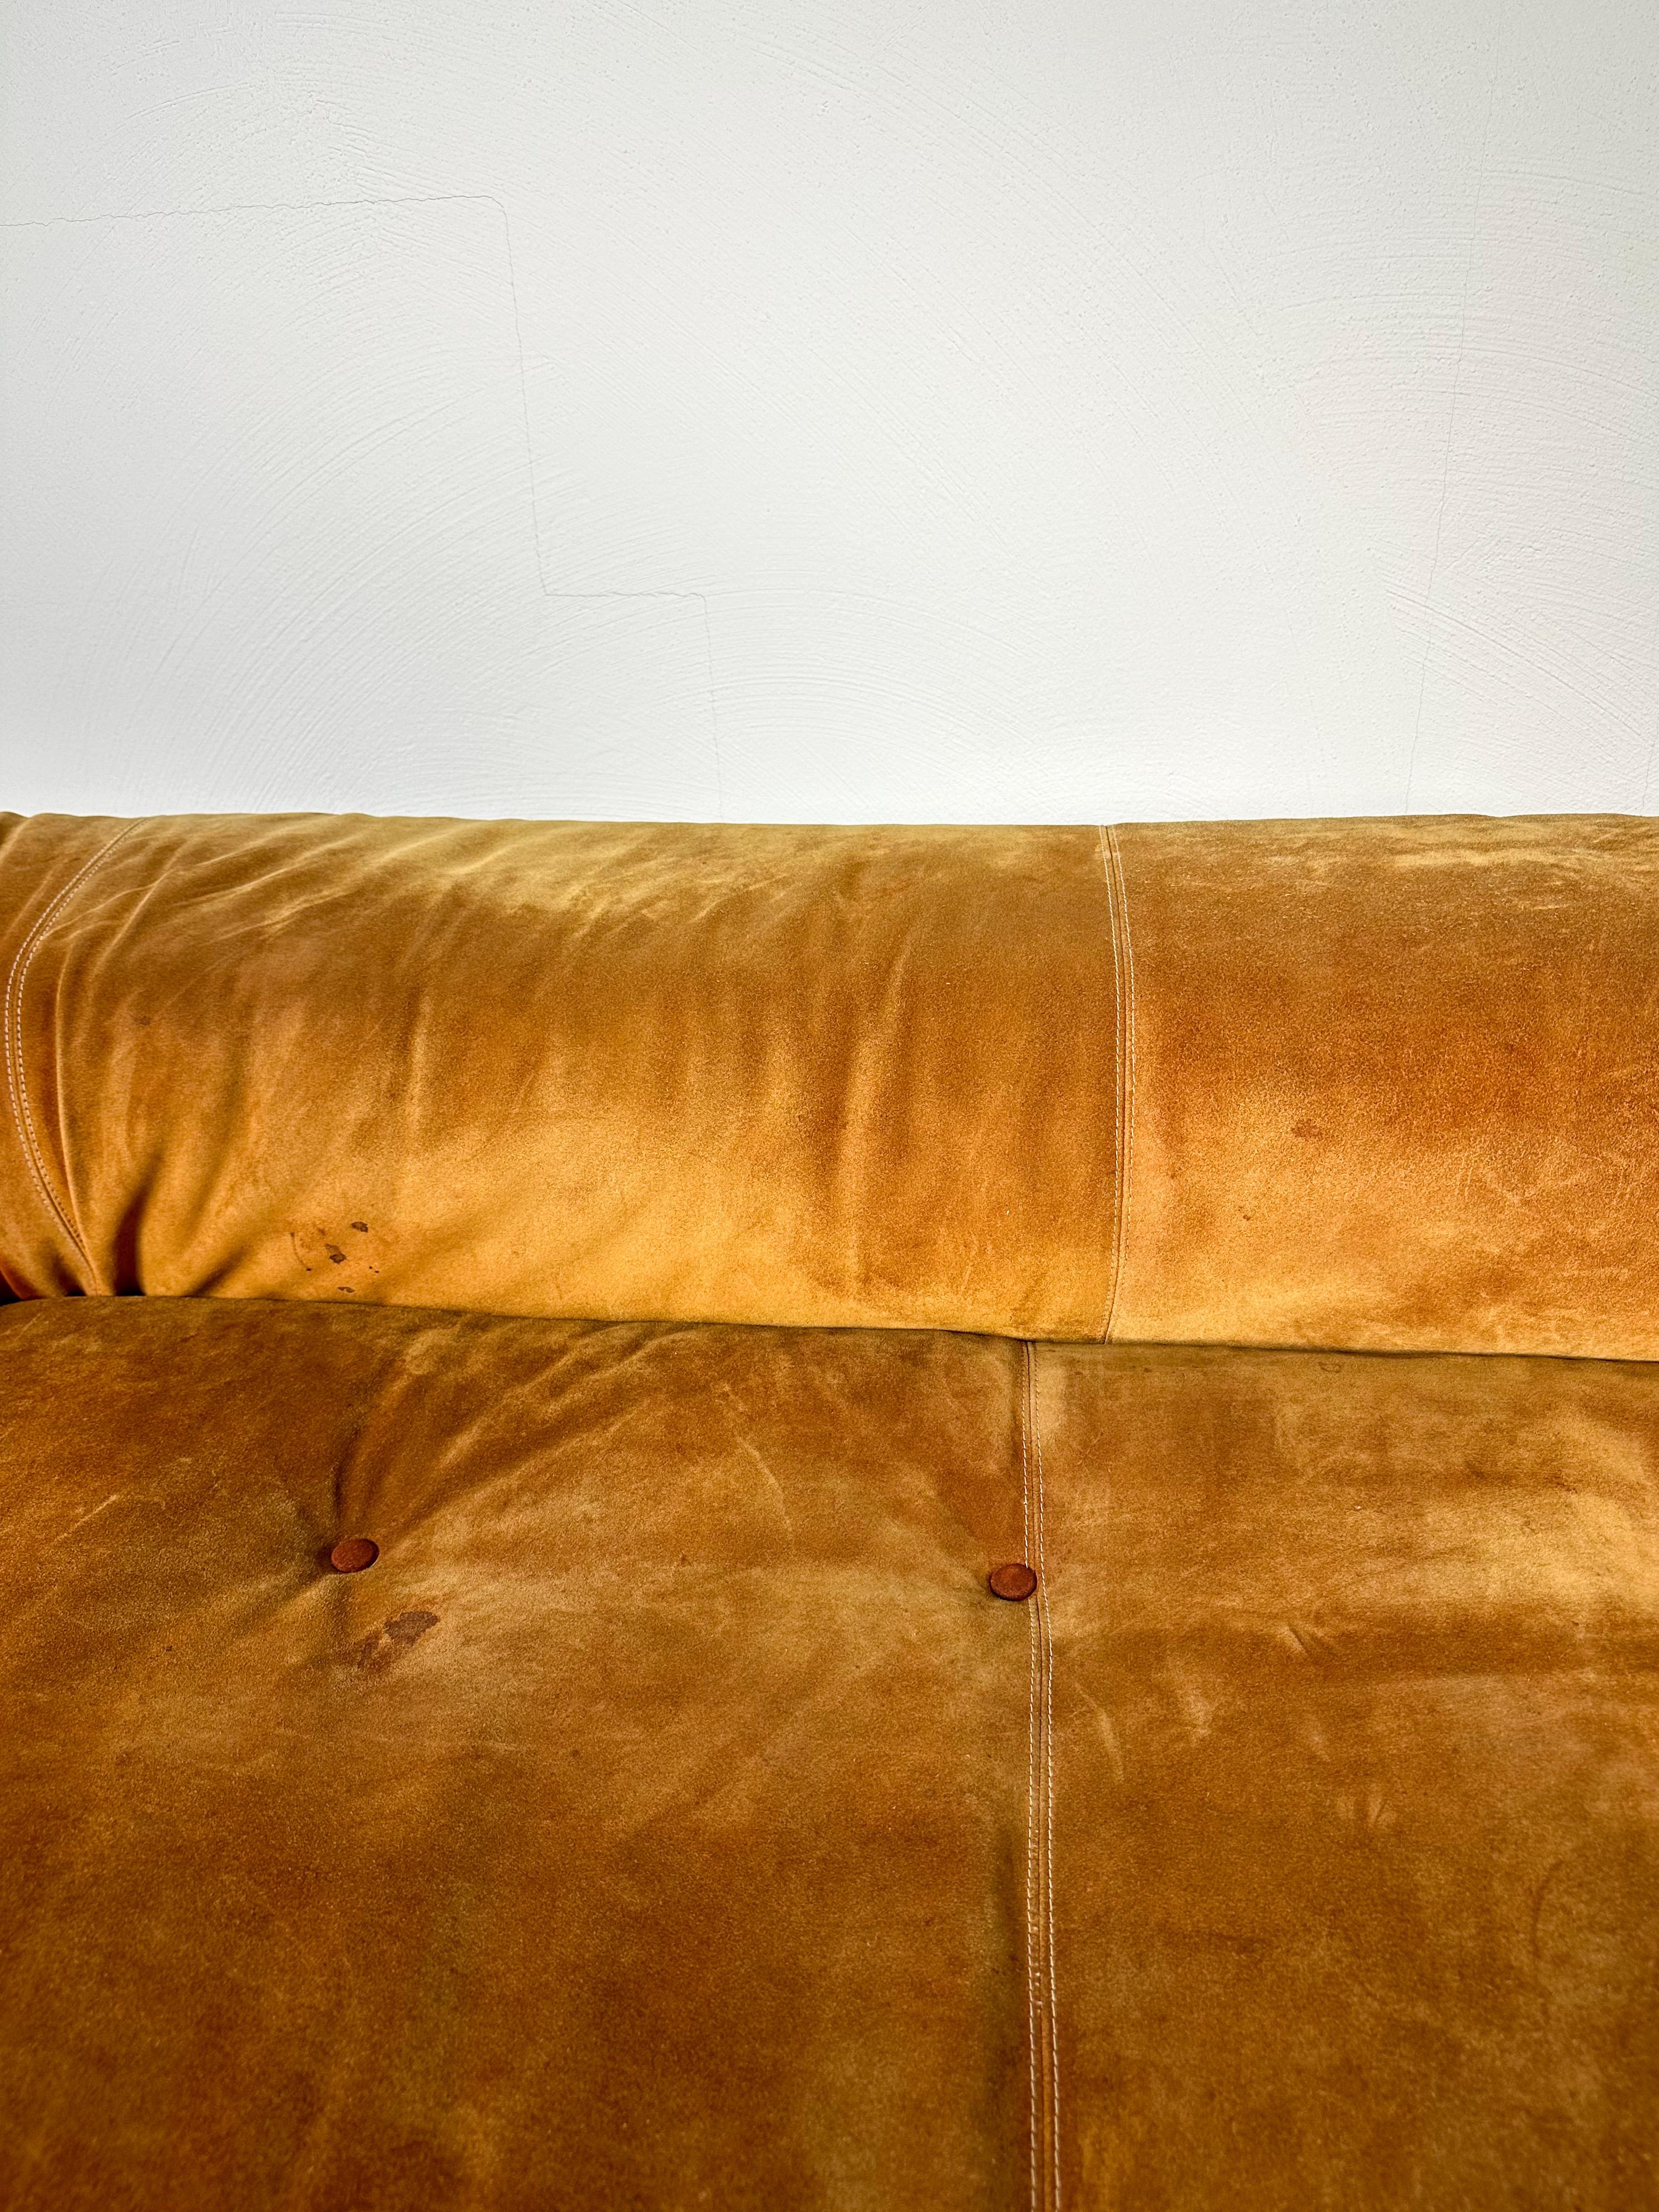 Vintage Suede 3-Seater Anfibio Sofa Bed by Alessandro Becchi for Giovannetti 70s For Sale 6